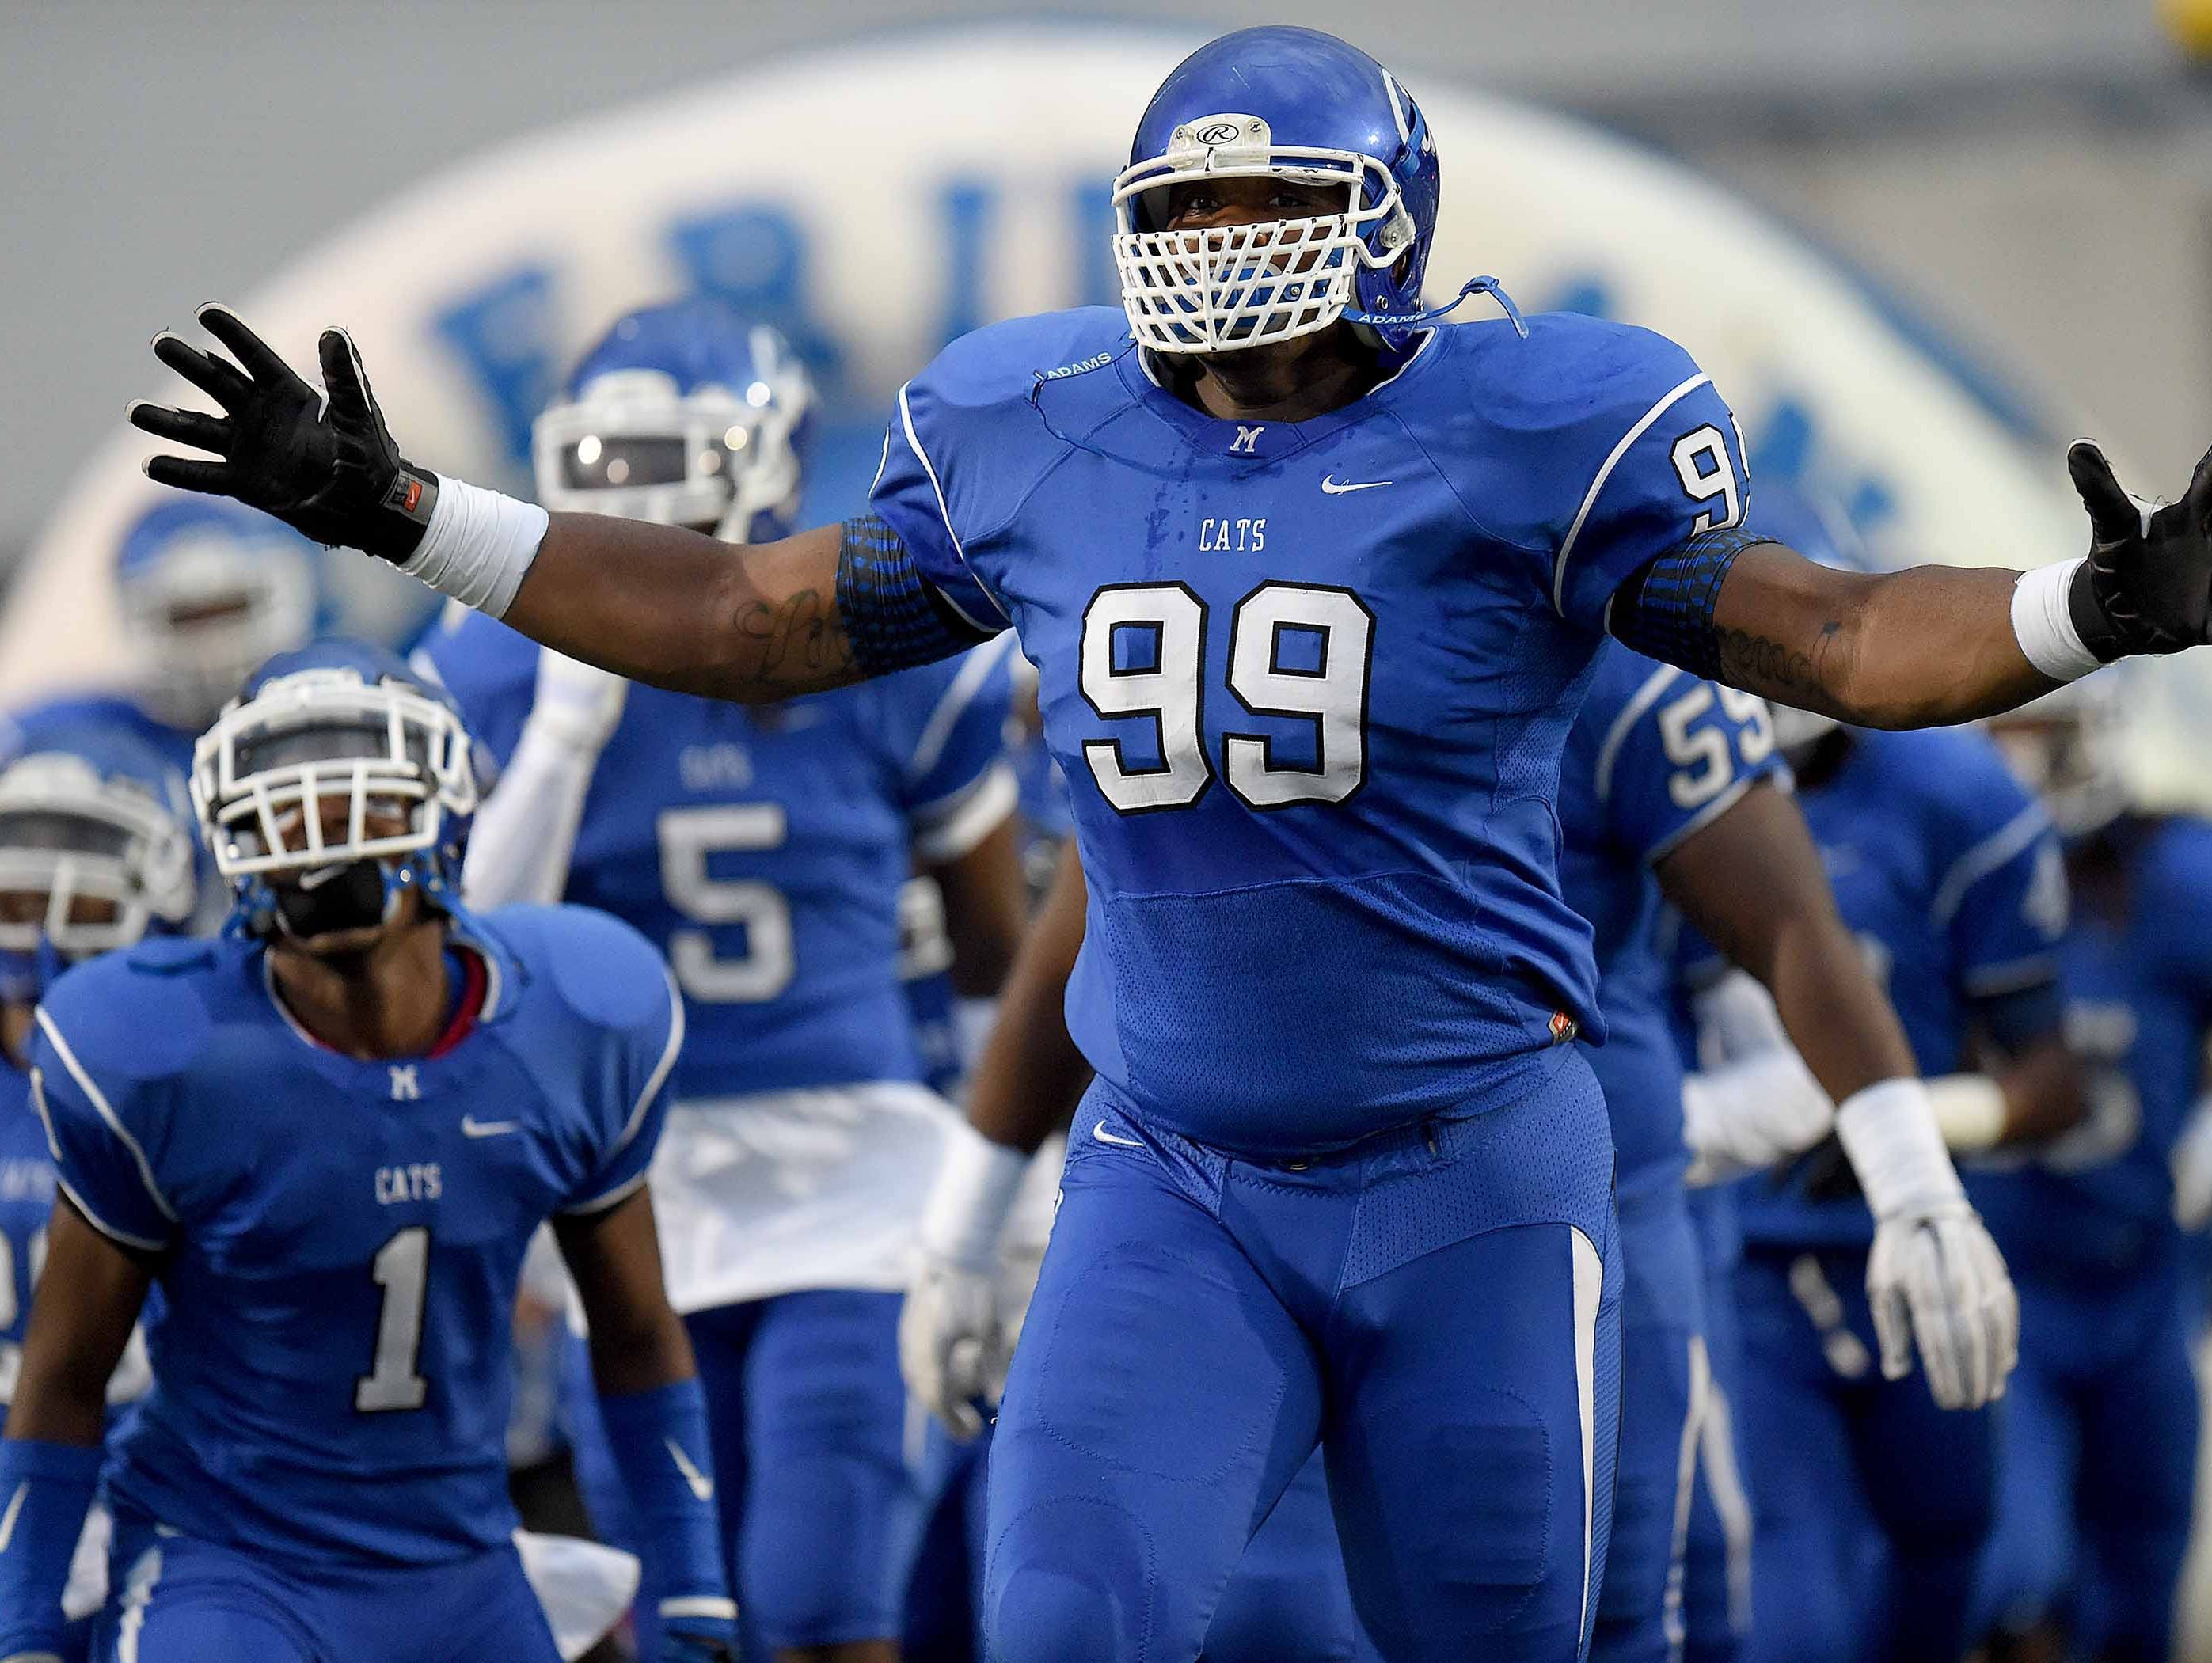 Meridian defensive tackle Raekwon Davis leads the Wildcats onto the field